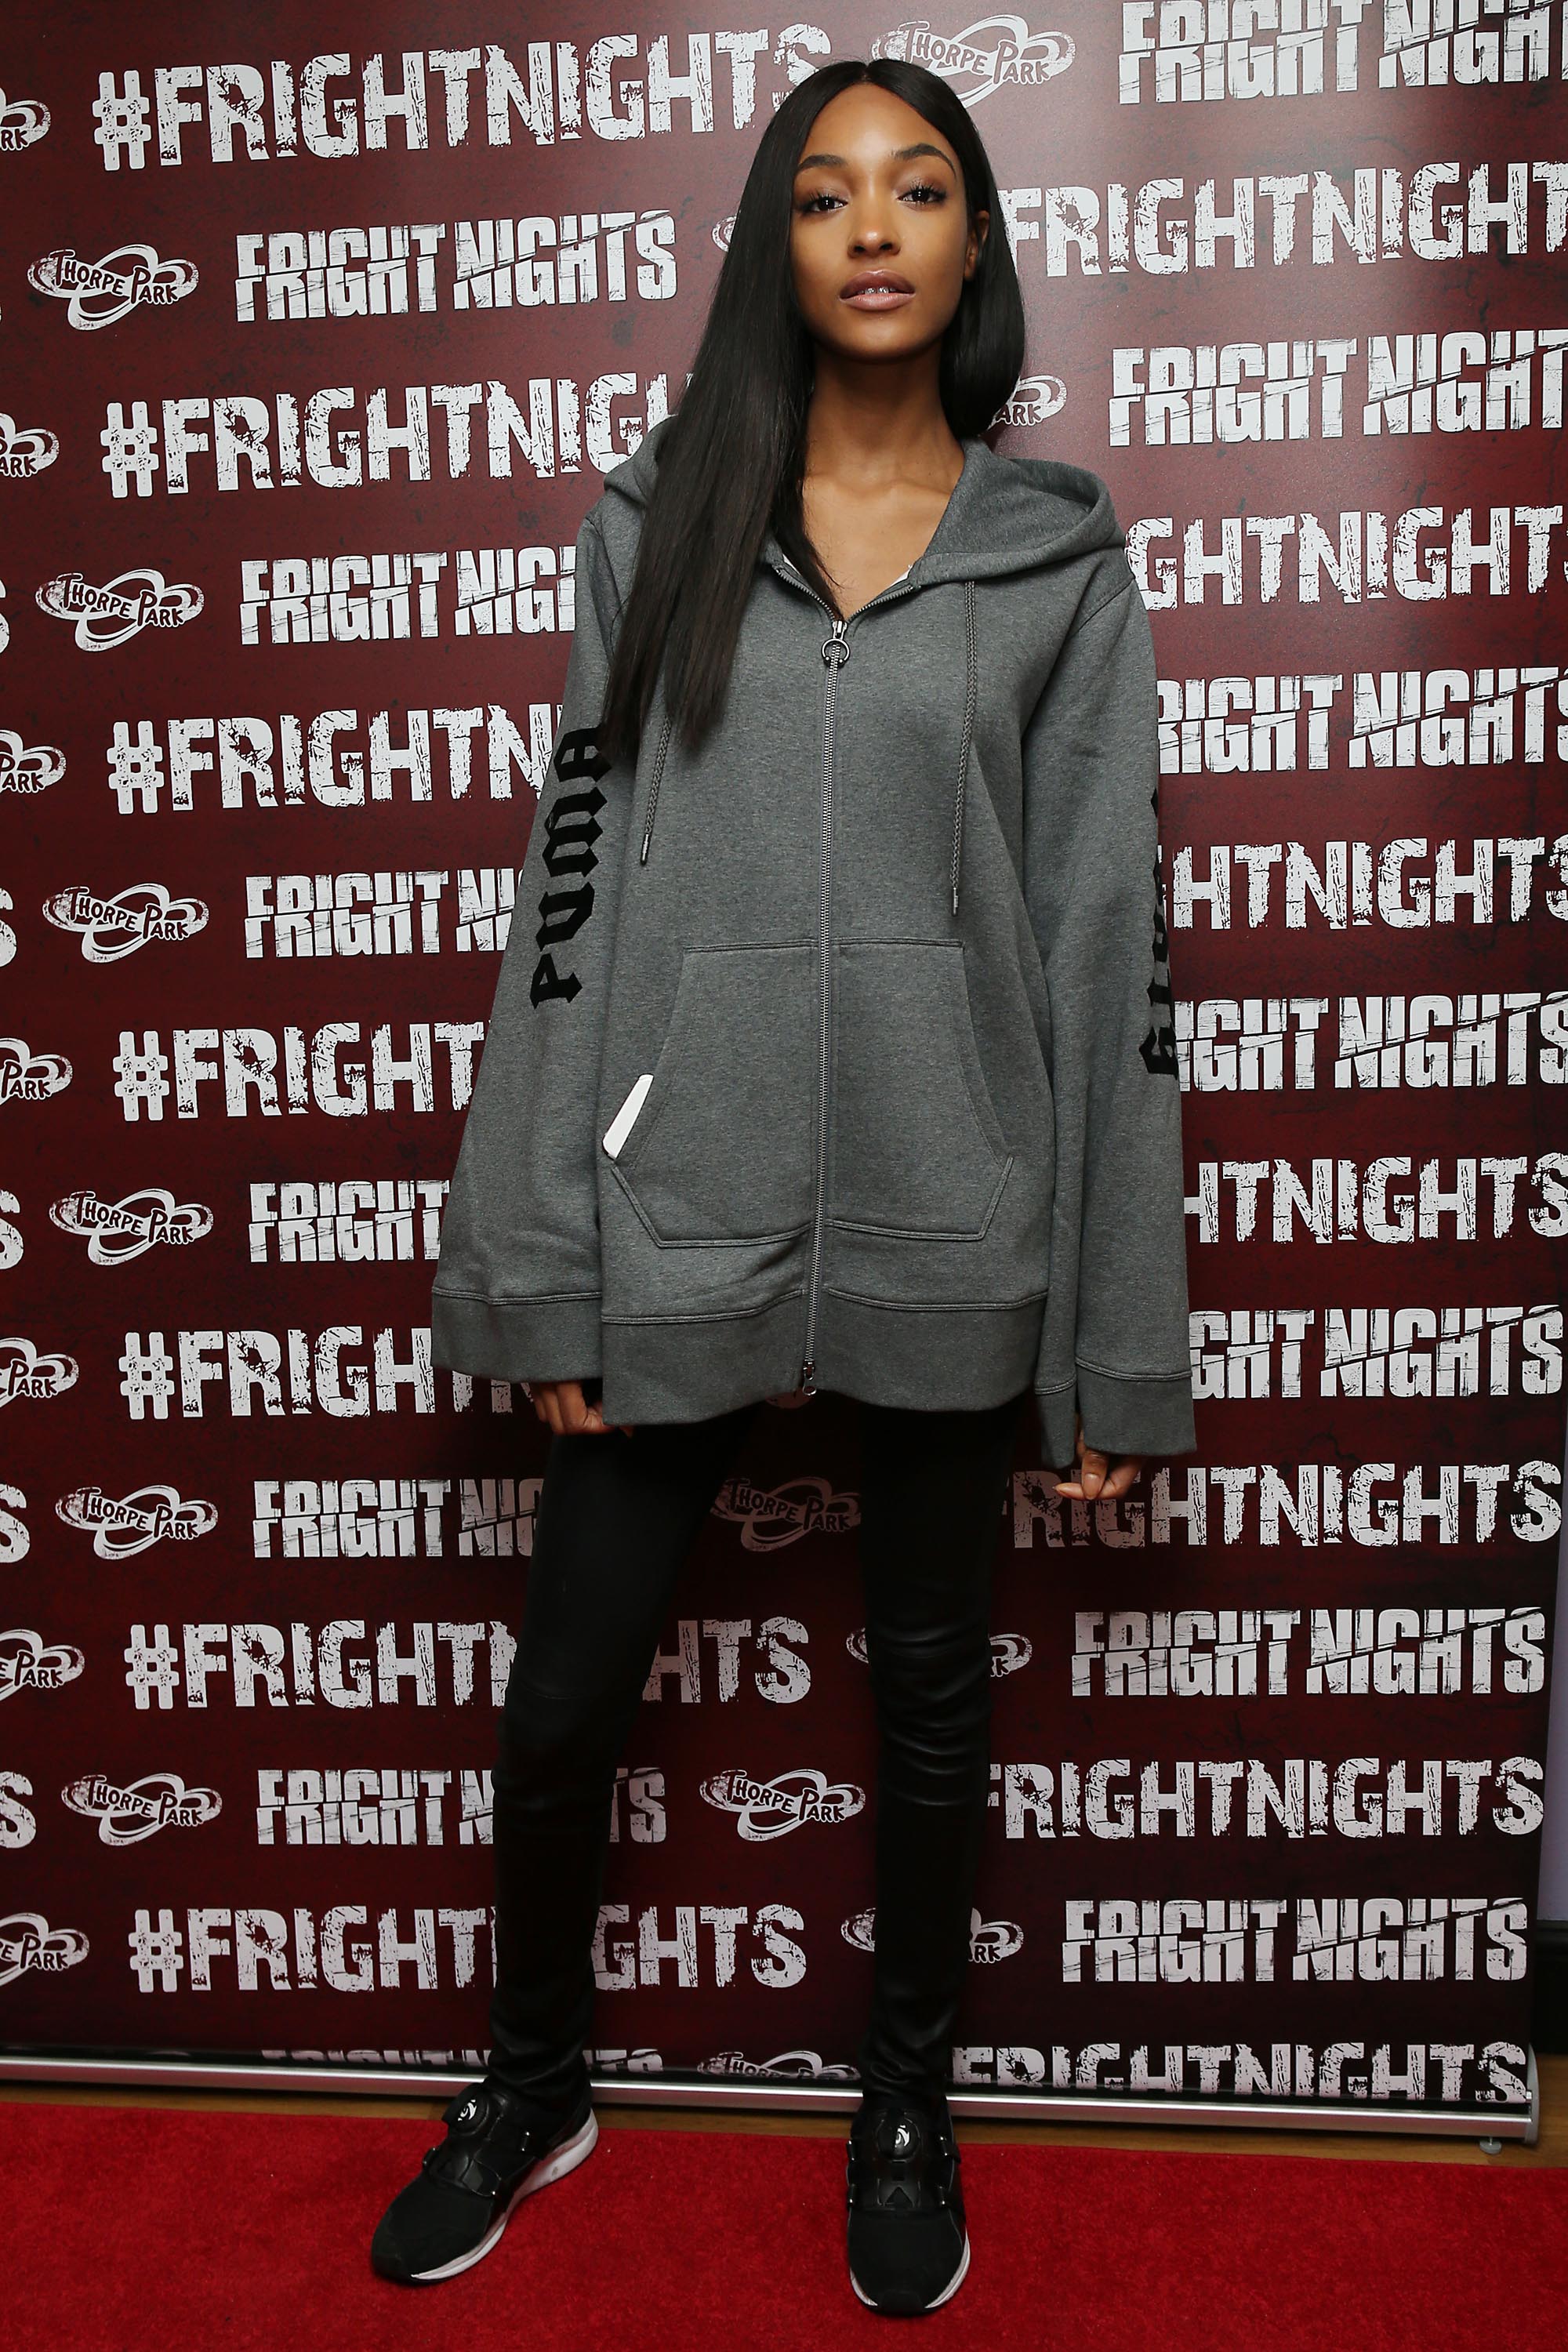 Jourdan Dunn attends the launch of Thorpe Park’s Fright Nights